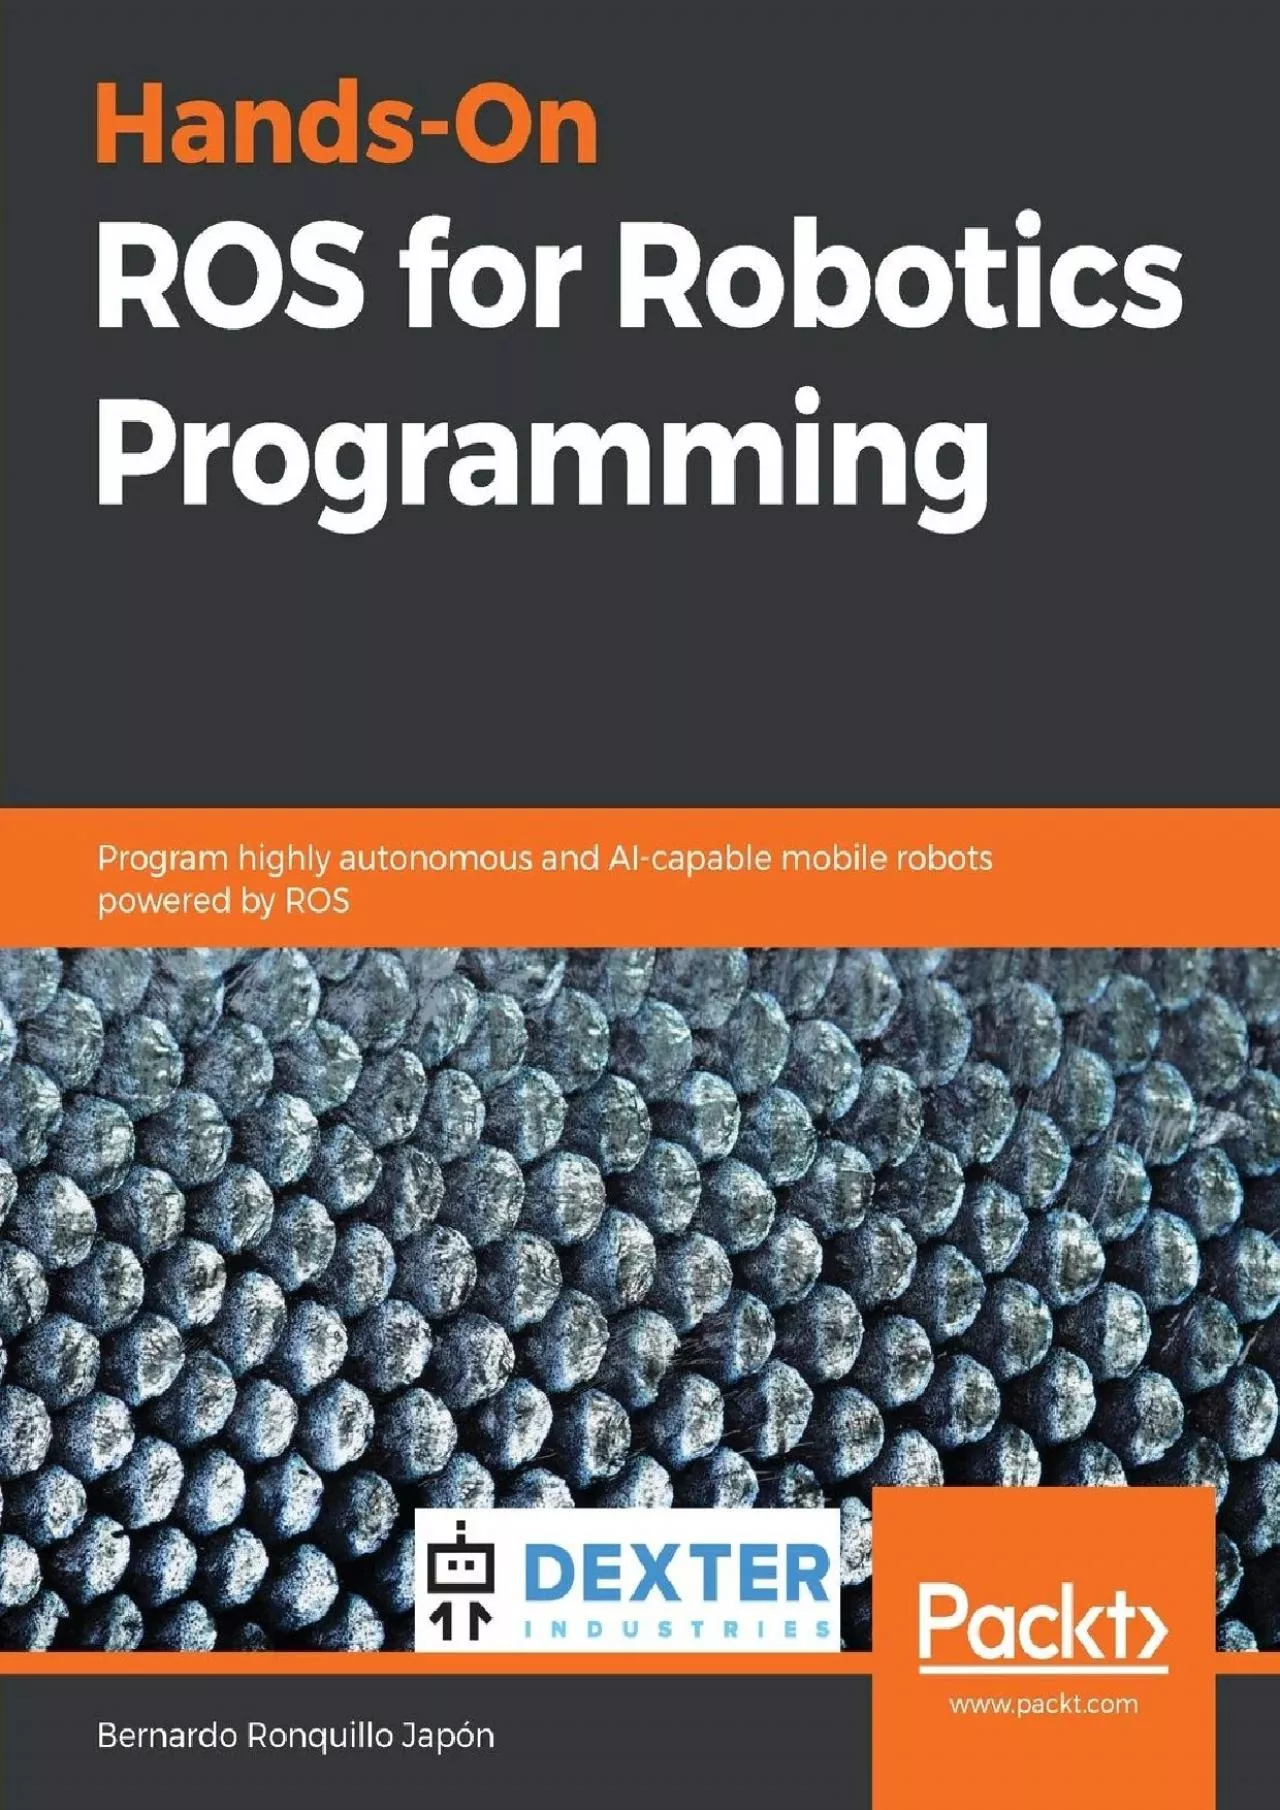 [DOWLOAD]-Hands-On ROS for Robotics Programming Program highly autonomous and AI-capable